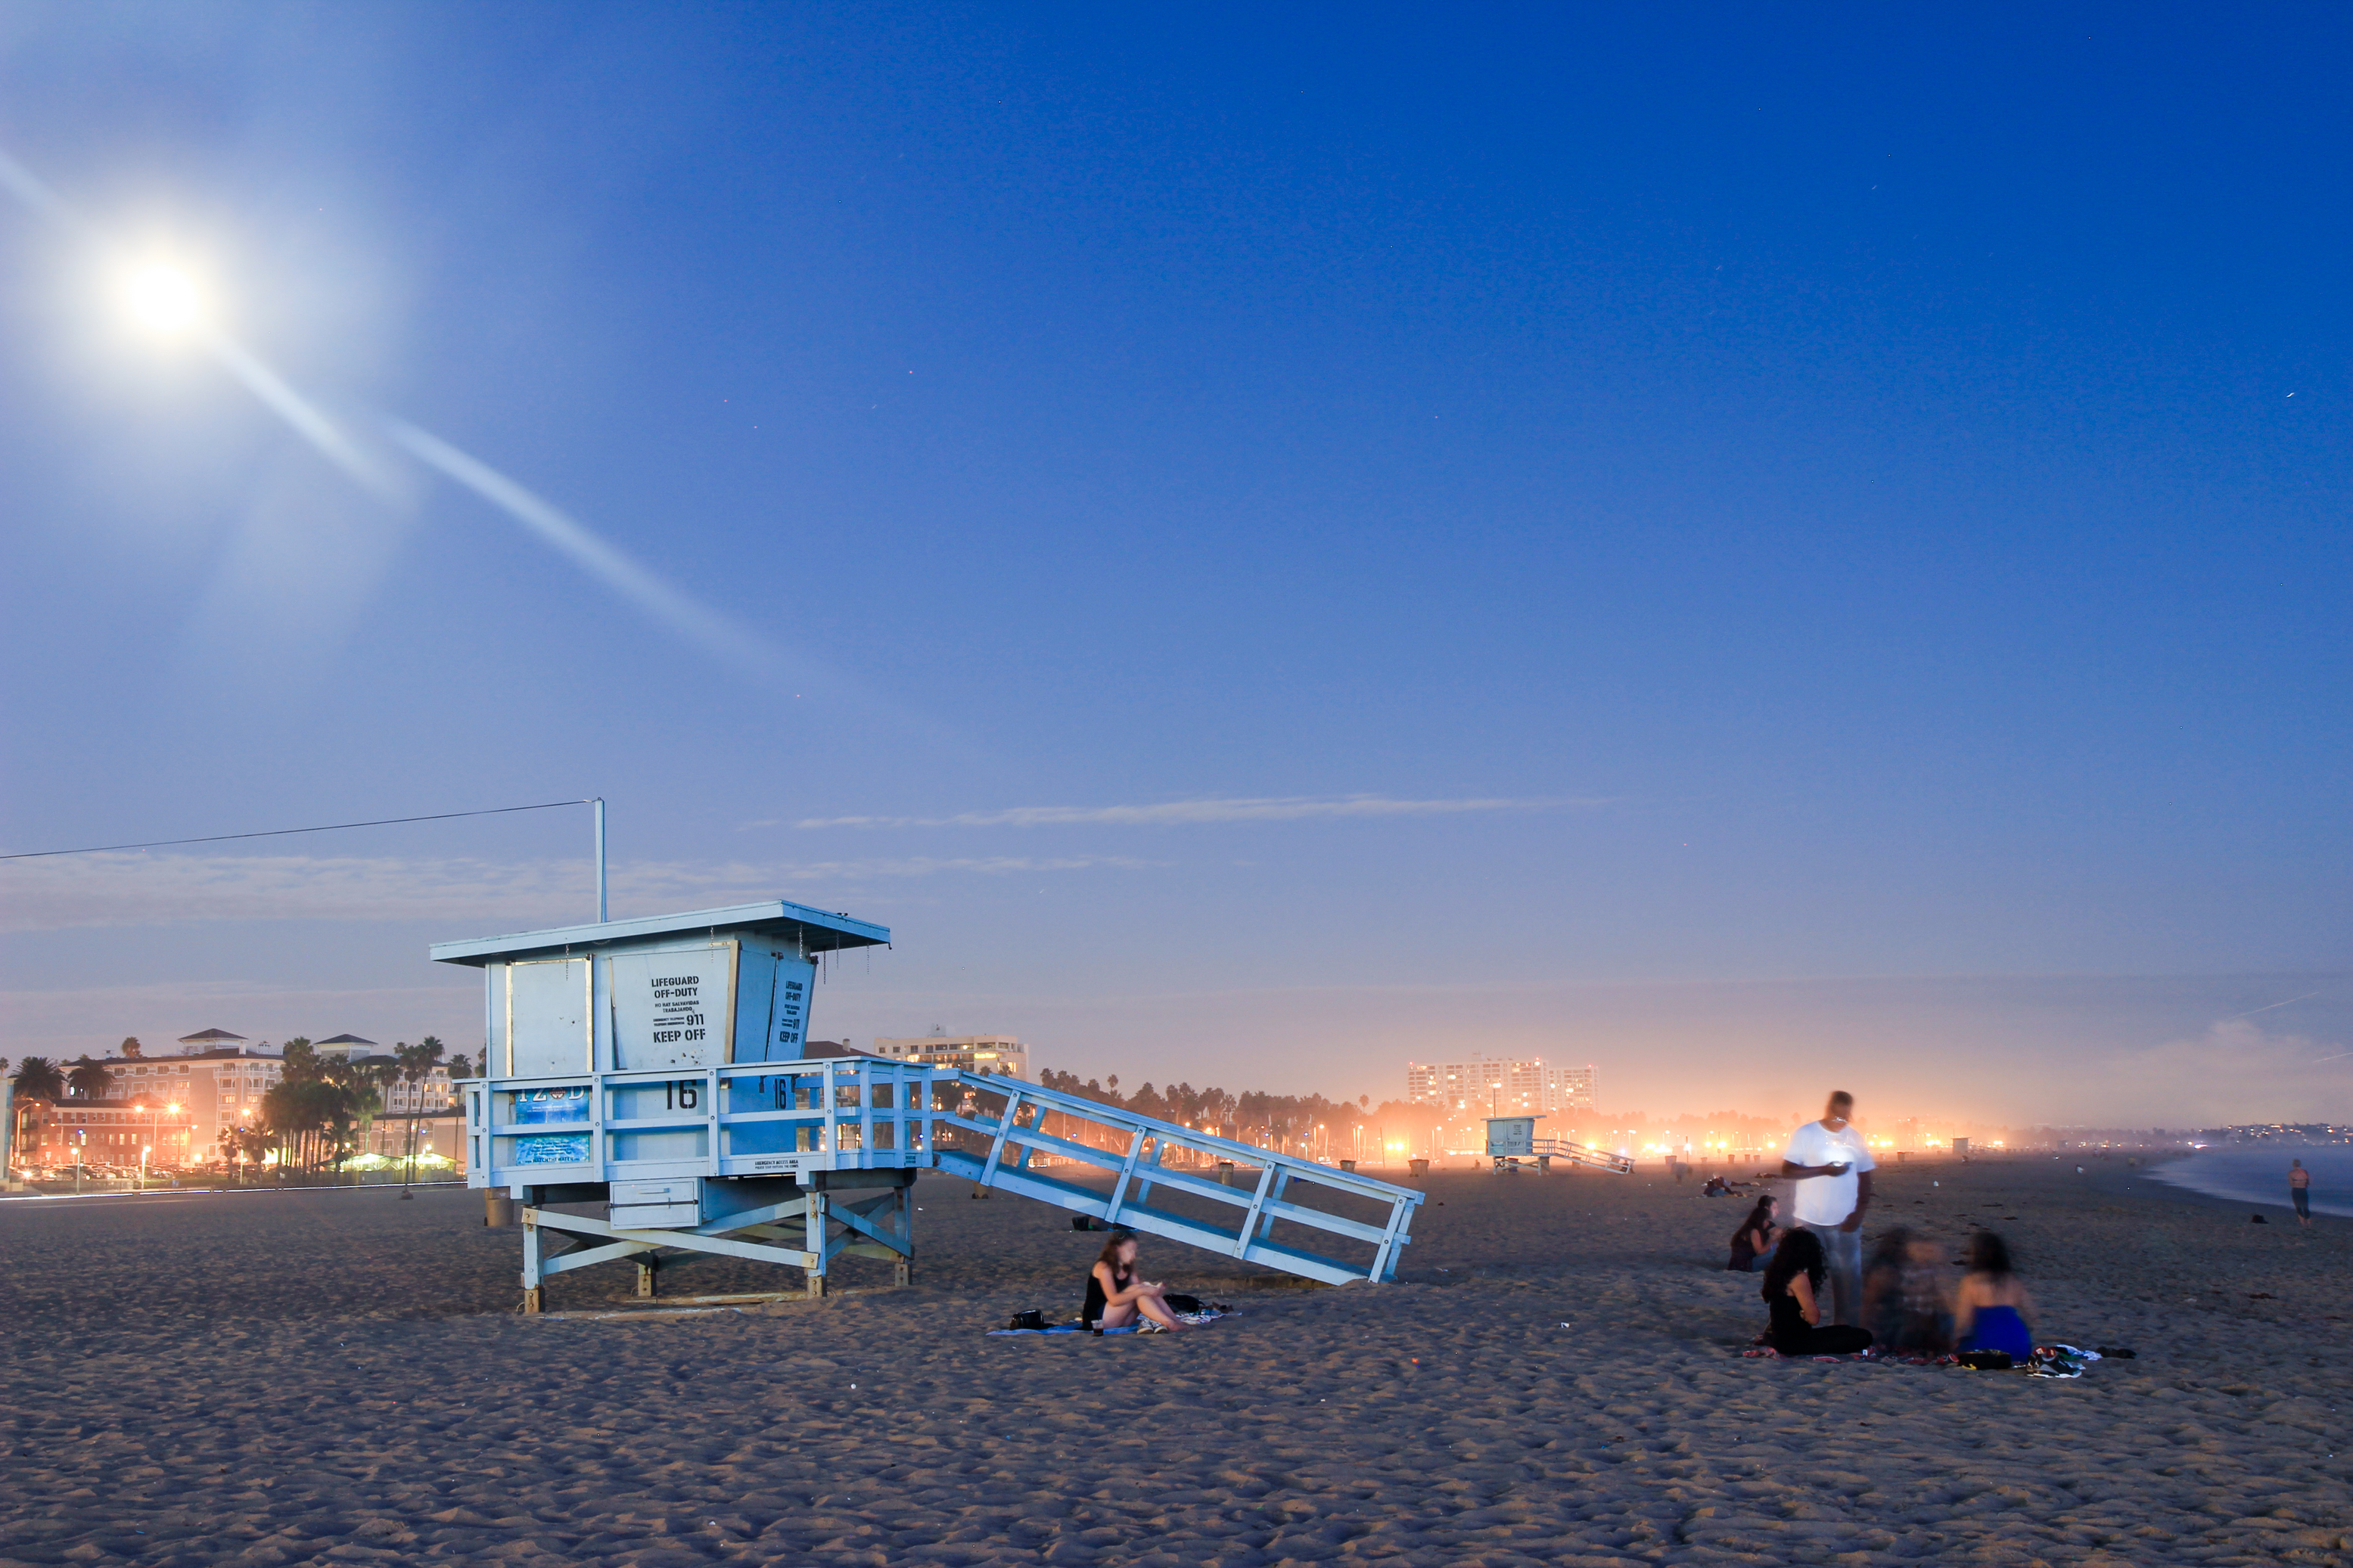 5 Best Los Angeles Beaches for a $20 Date | Find out what beaches made the list and why!